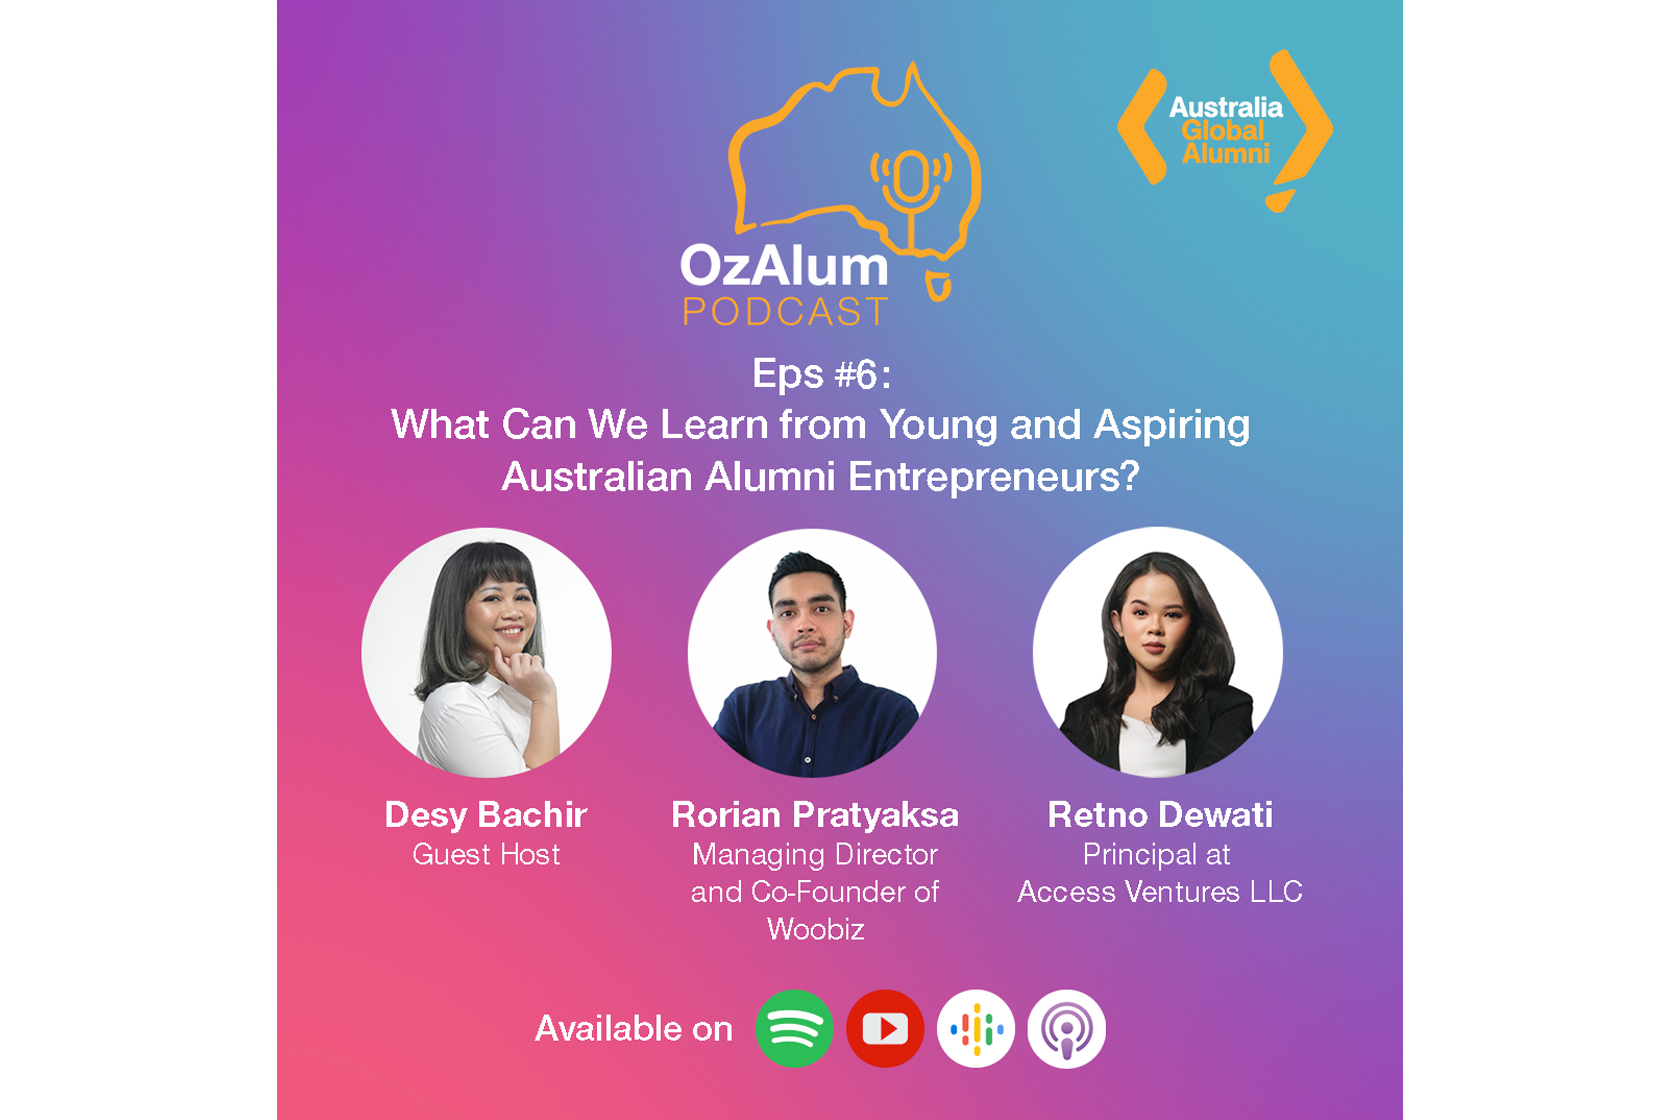 OzAlum Podcast Eps #6: What Can We Learn from Young and Aspiring Australian Alumni Entrepreneurs?